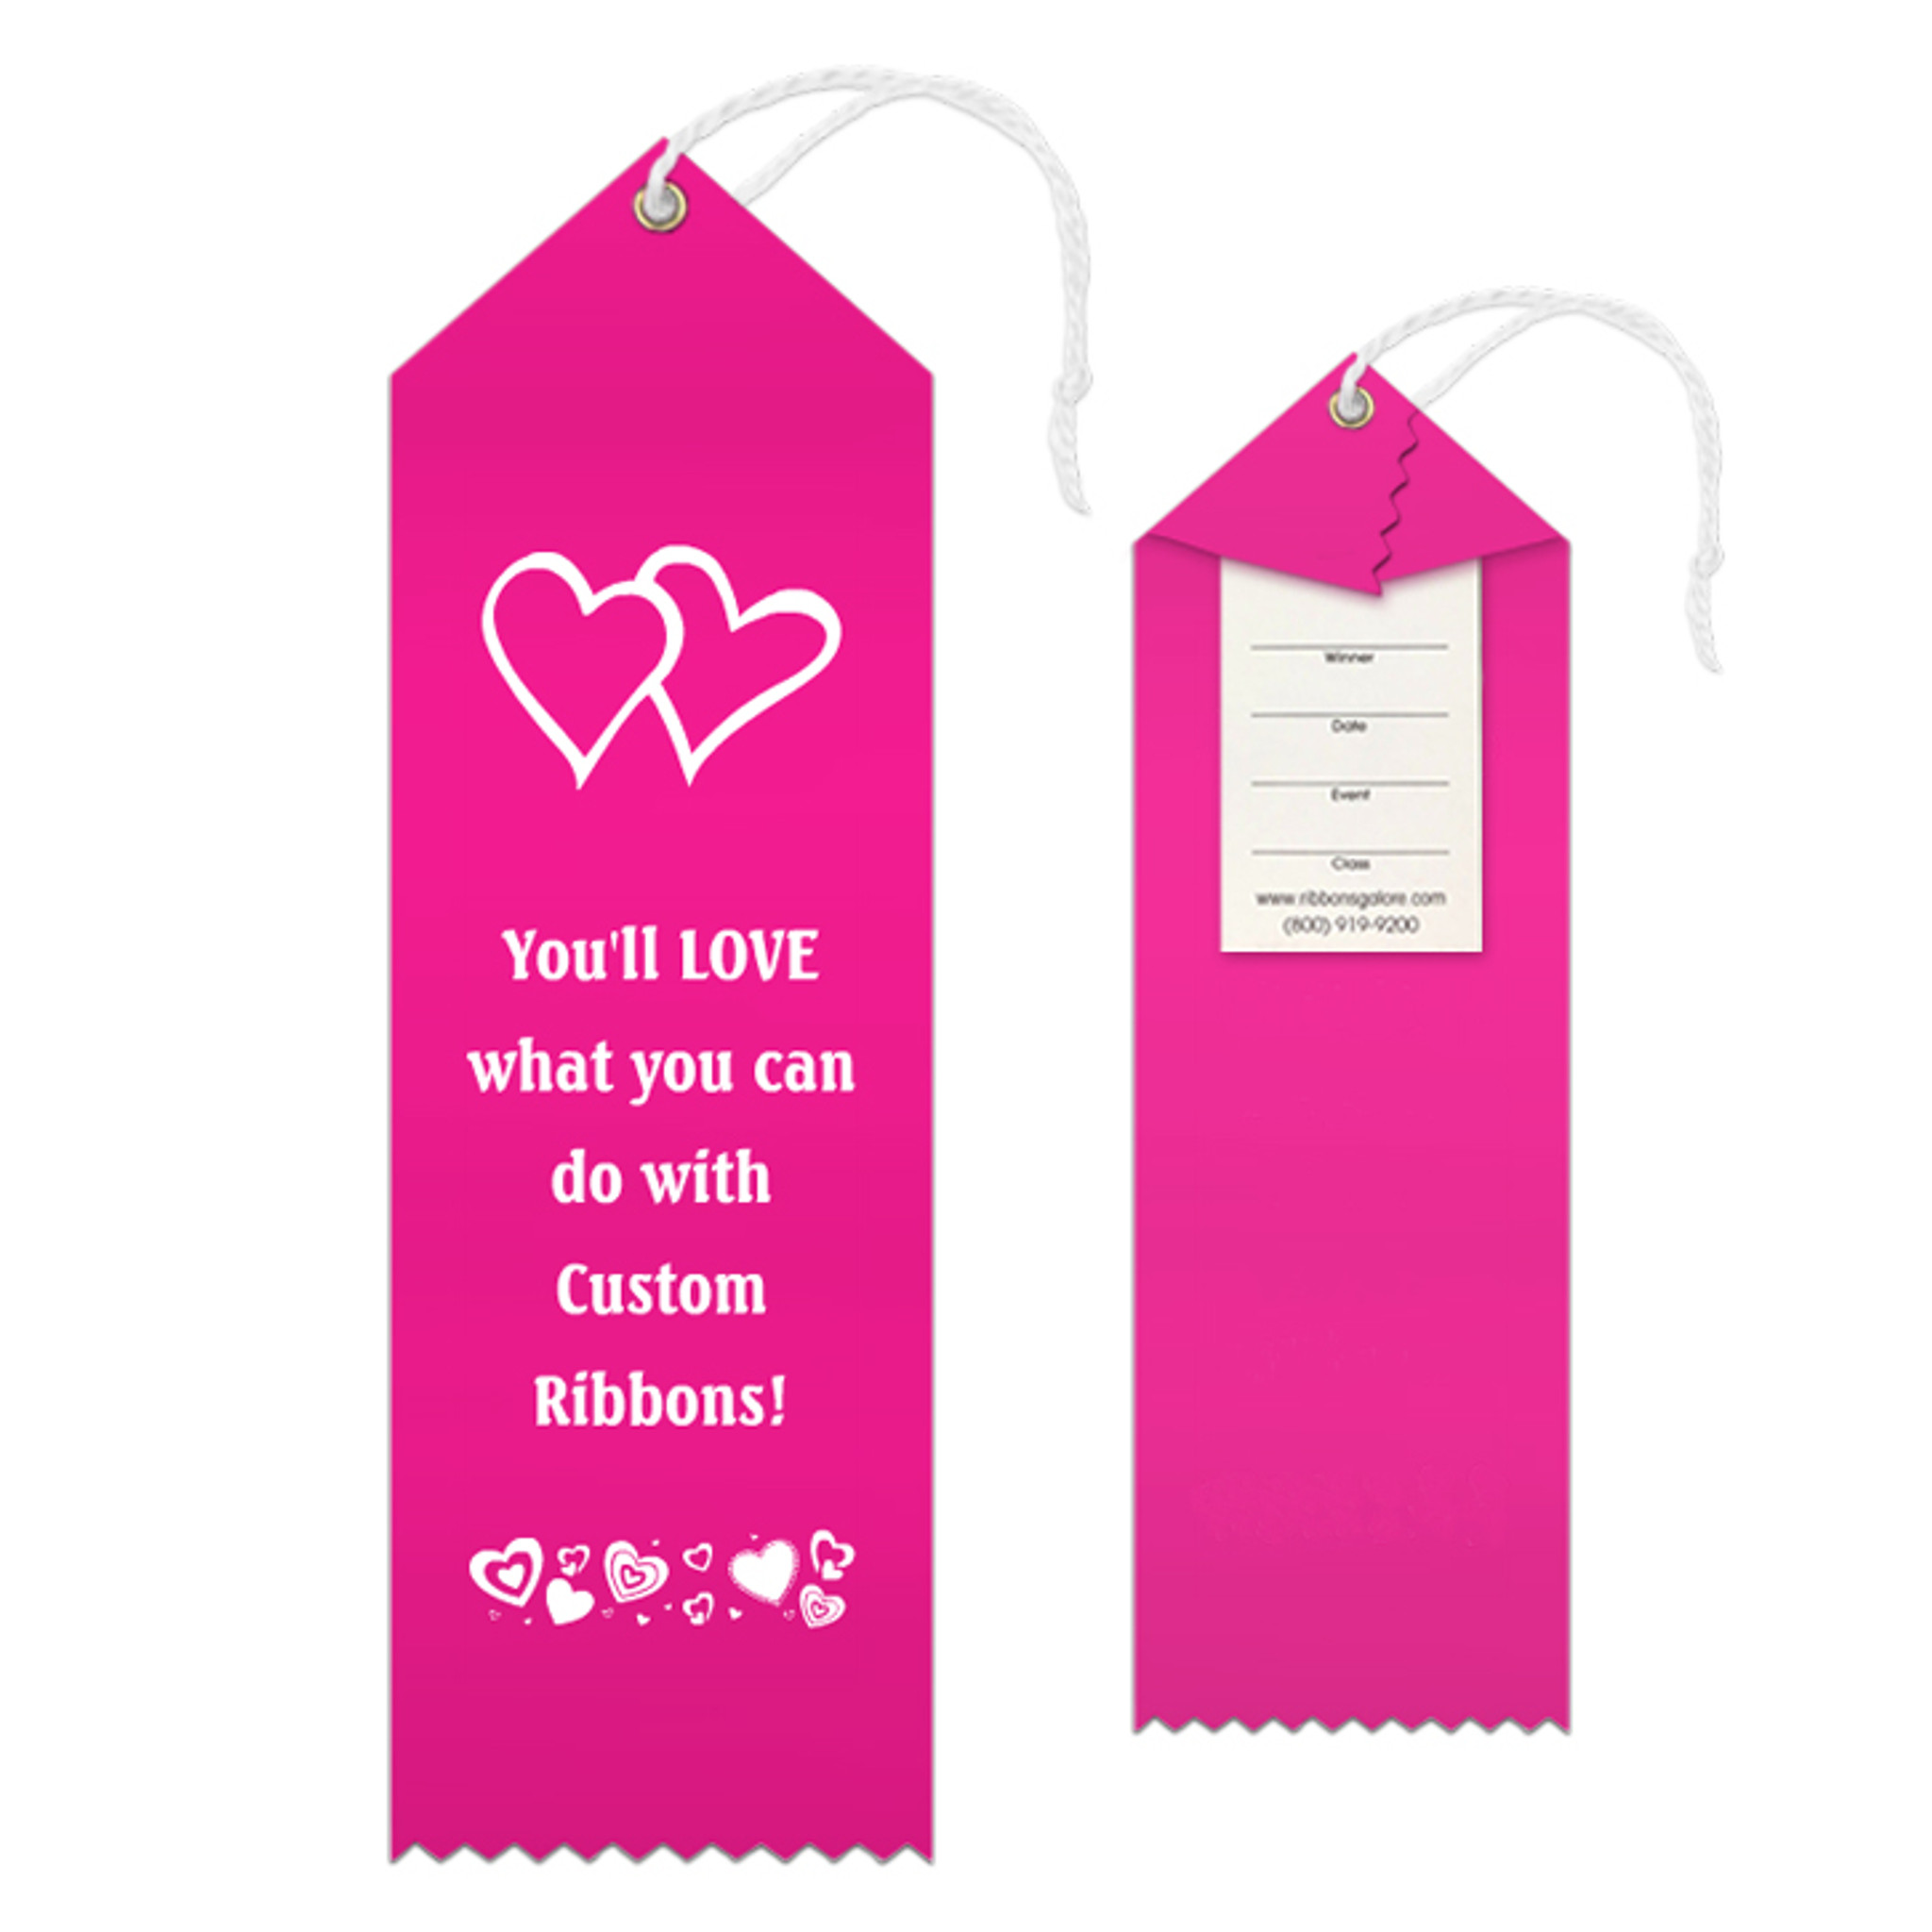 Custom Award Ribbon 2.5x8 Peaked with Event Card and String